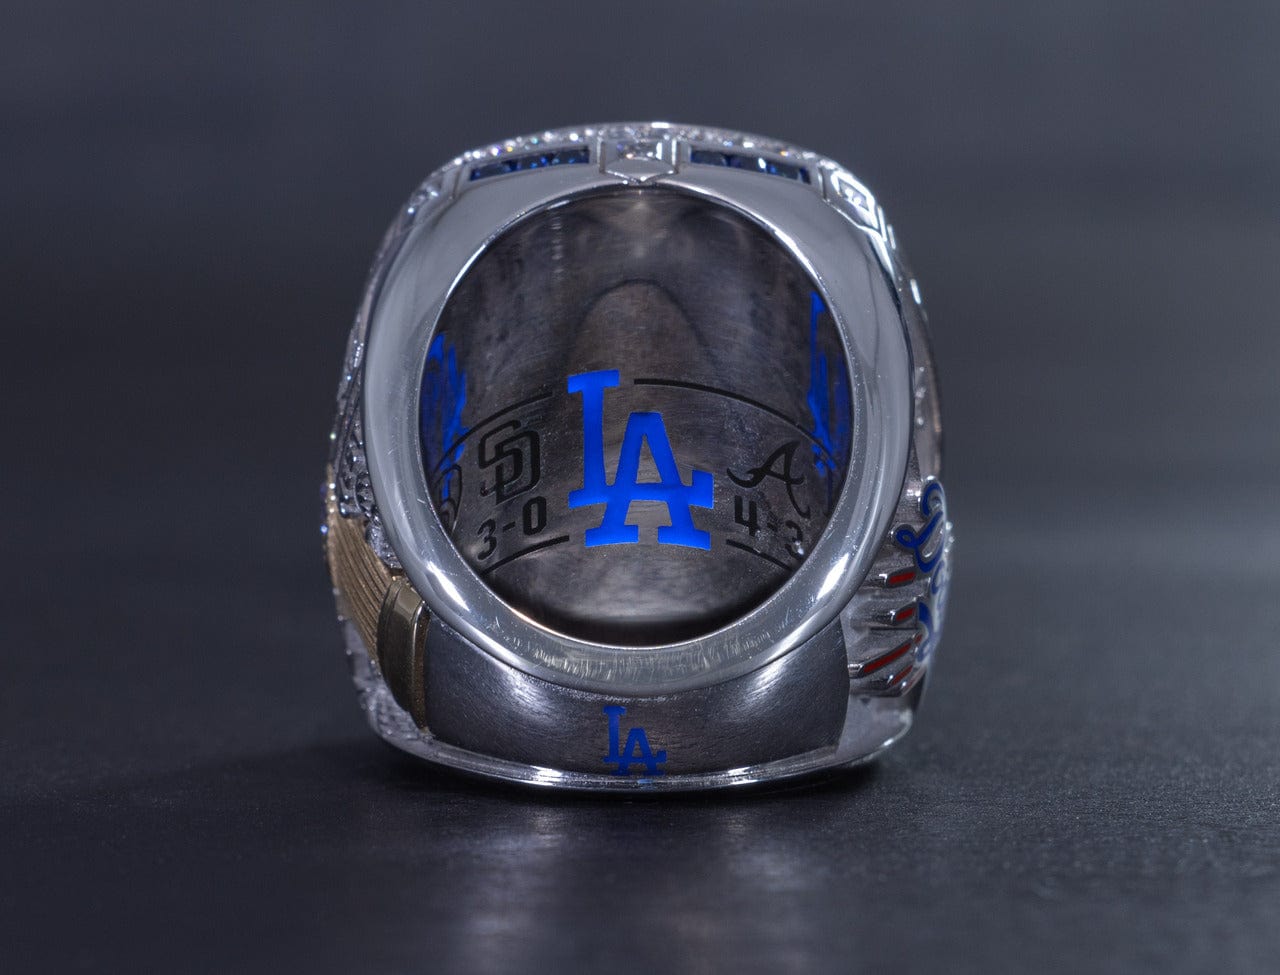 Los Angeles Dodgers receive their 2020 World Series championship rings